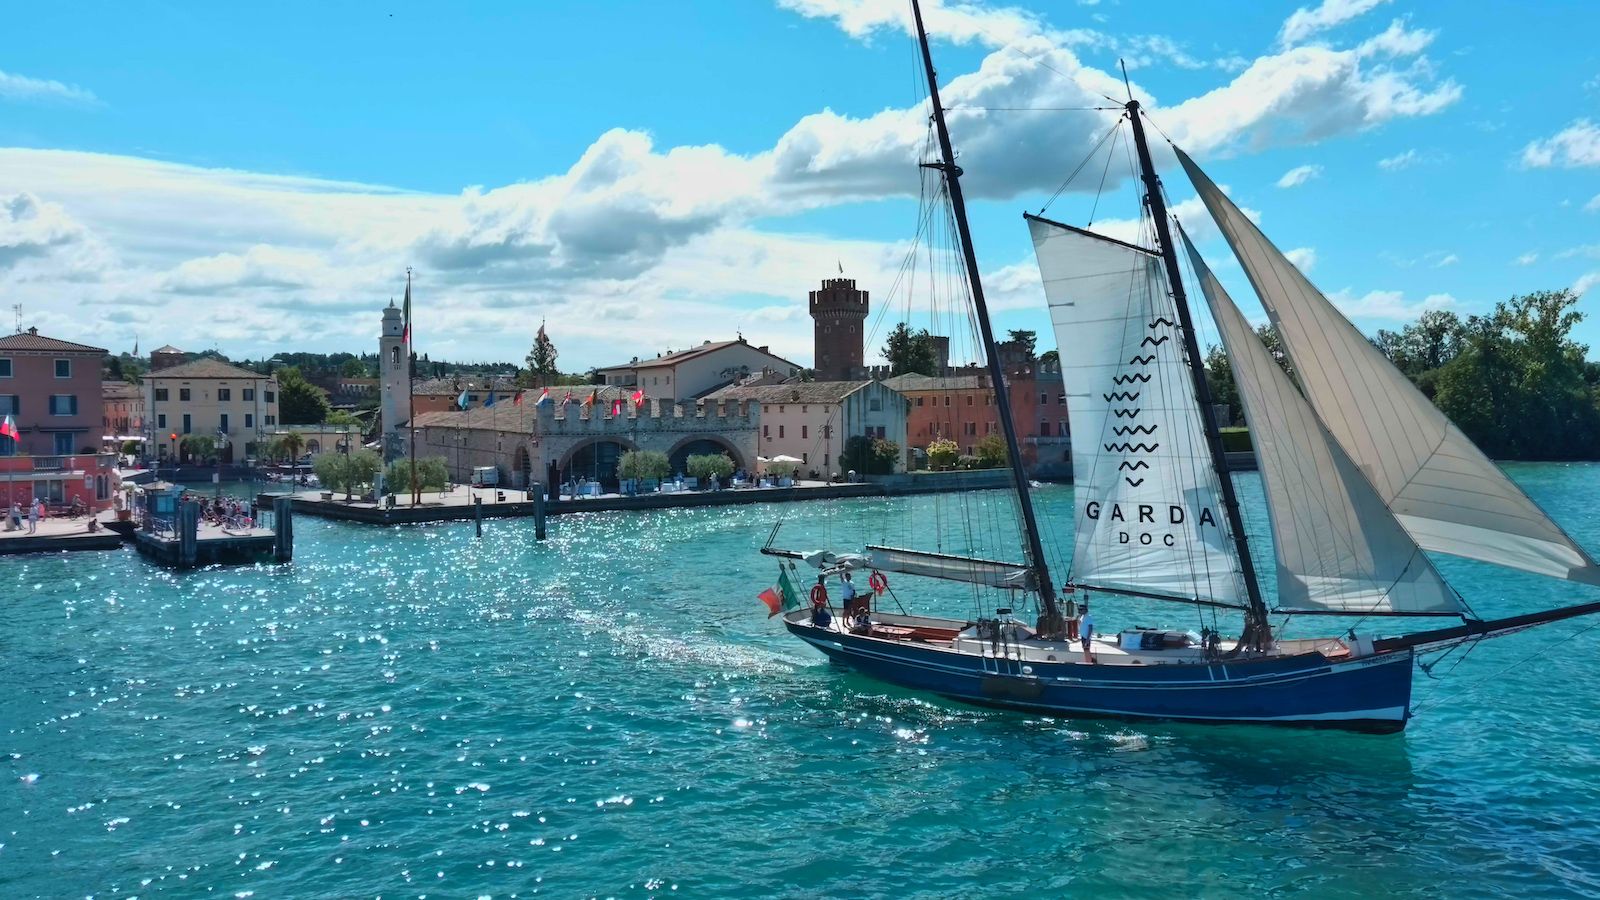 Will Lake Garda DOC succeed in becoming the ‘new Tuscany’?